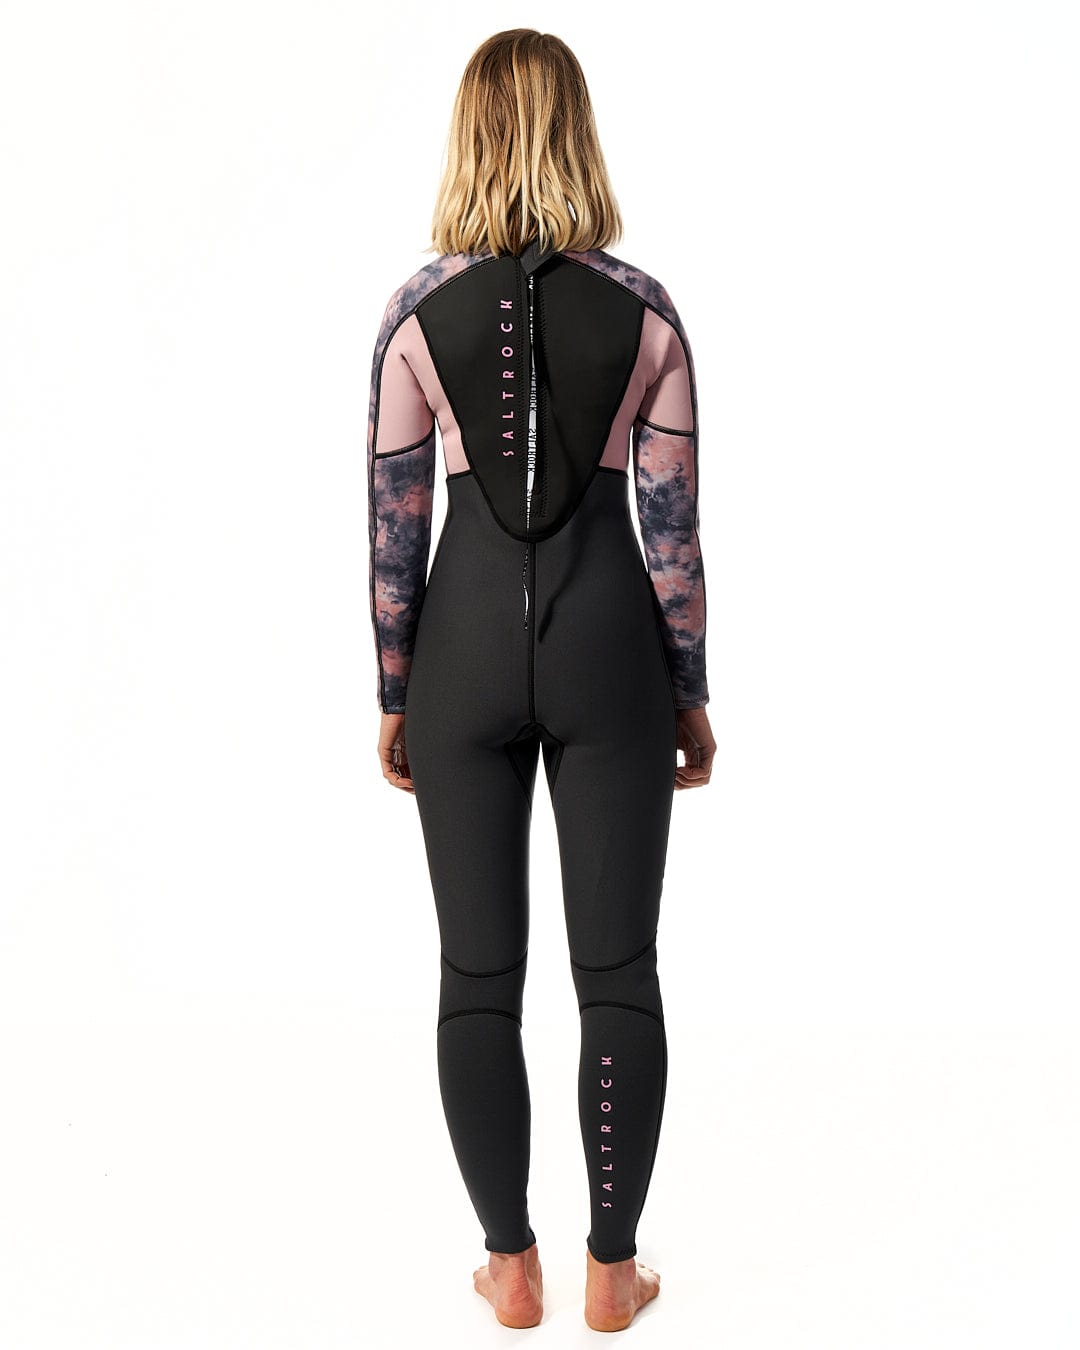 The back view of a woman wearing a Saltrock Vision - Womens 3/2 Back Zip Wetsuit - Light Pink.